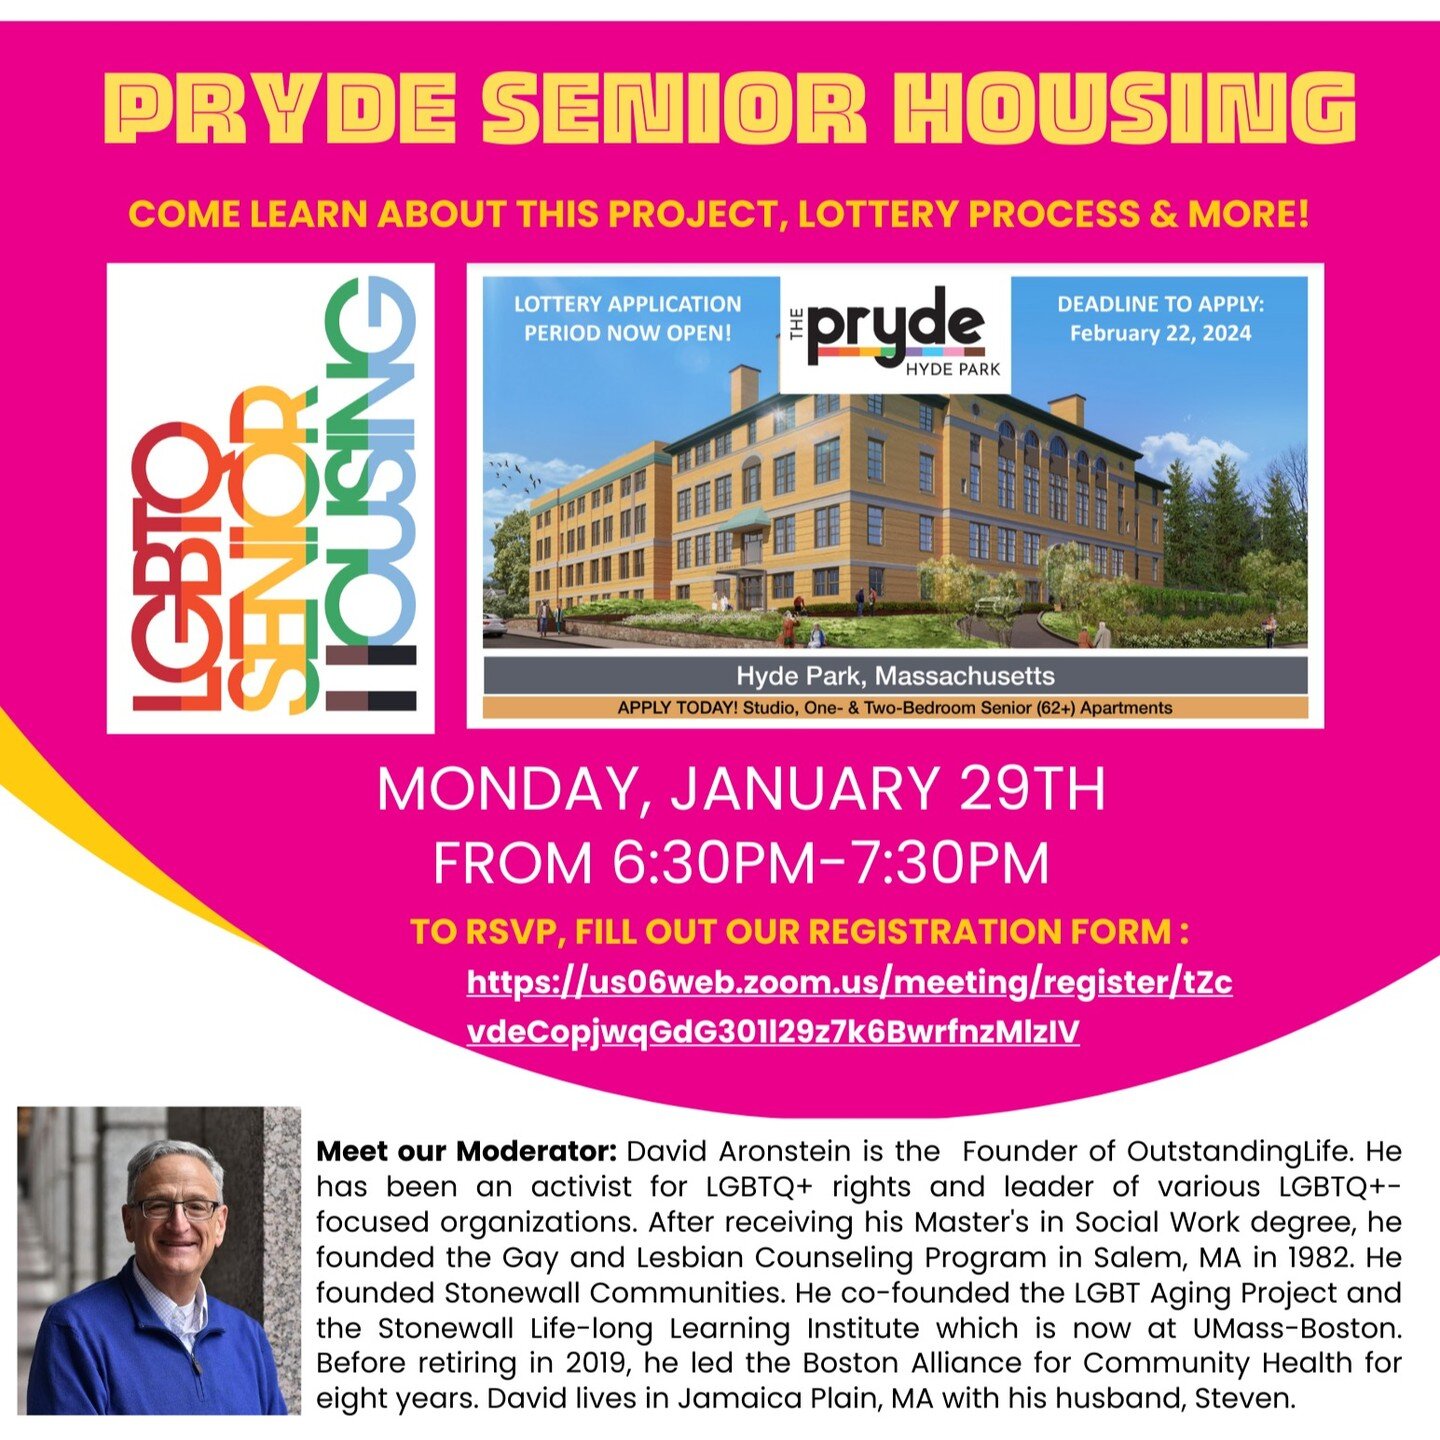 This coming Monday, January 29th, at 6:30PM, we are partnering with our good friends at OutstandingLife: a Virtual Community for LGBTQ+ Older Adults to offer a virtual program about The Pryde and The Pryde's housing lottery. Bring your questions and 